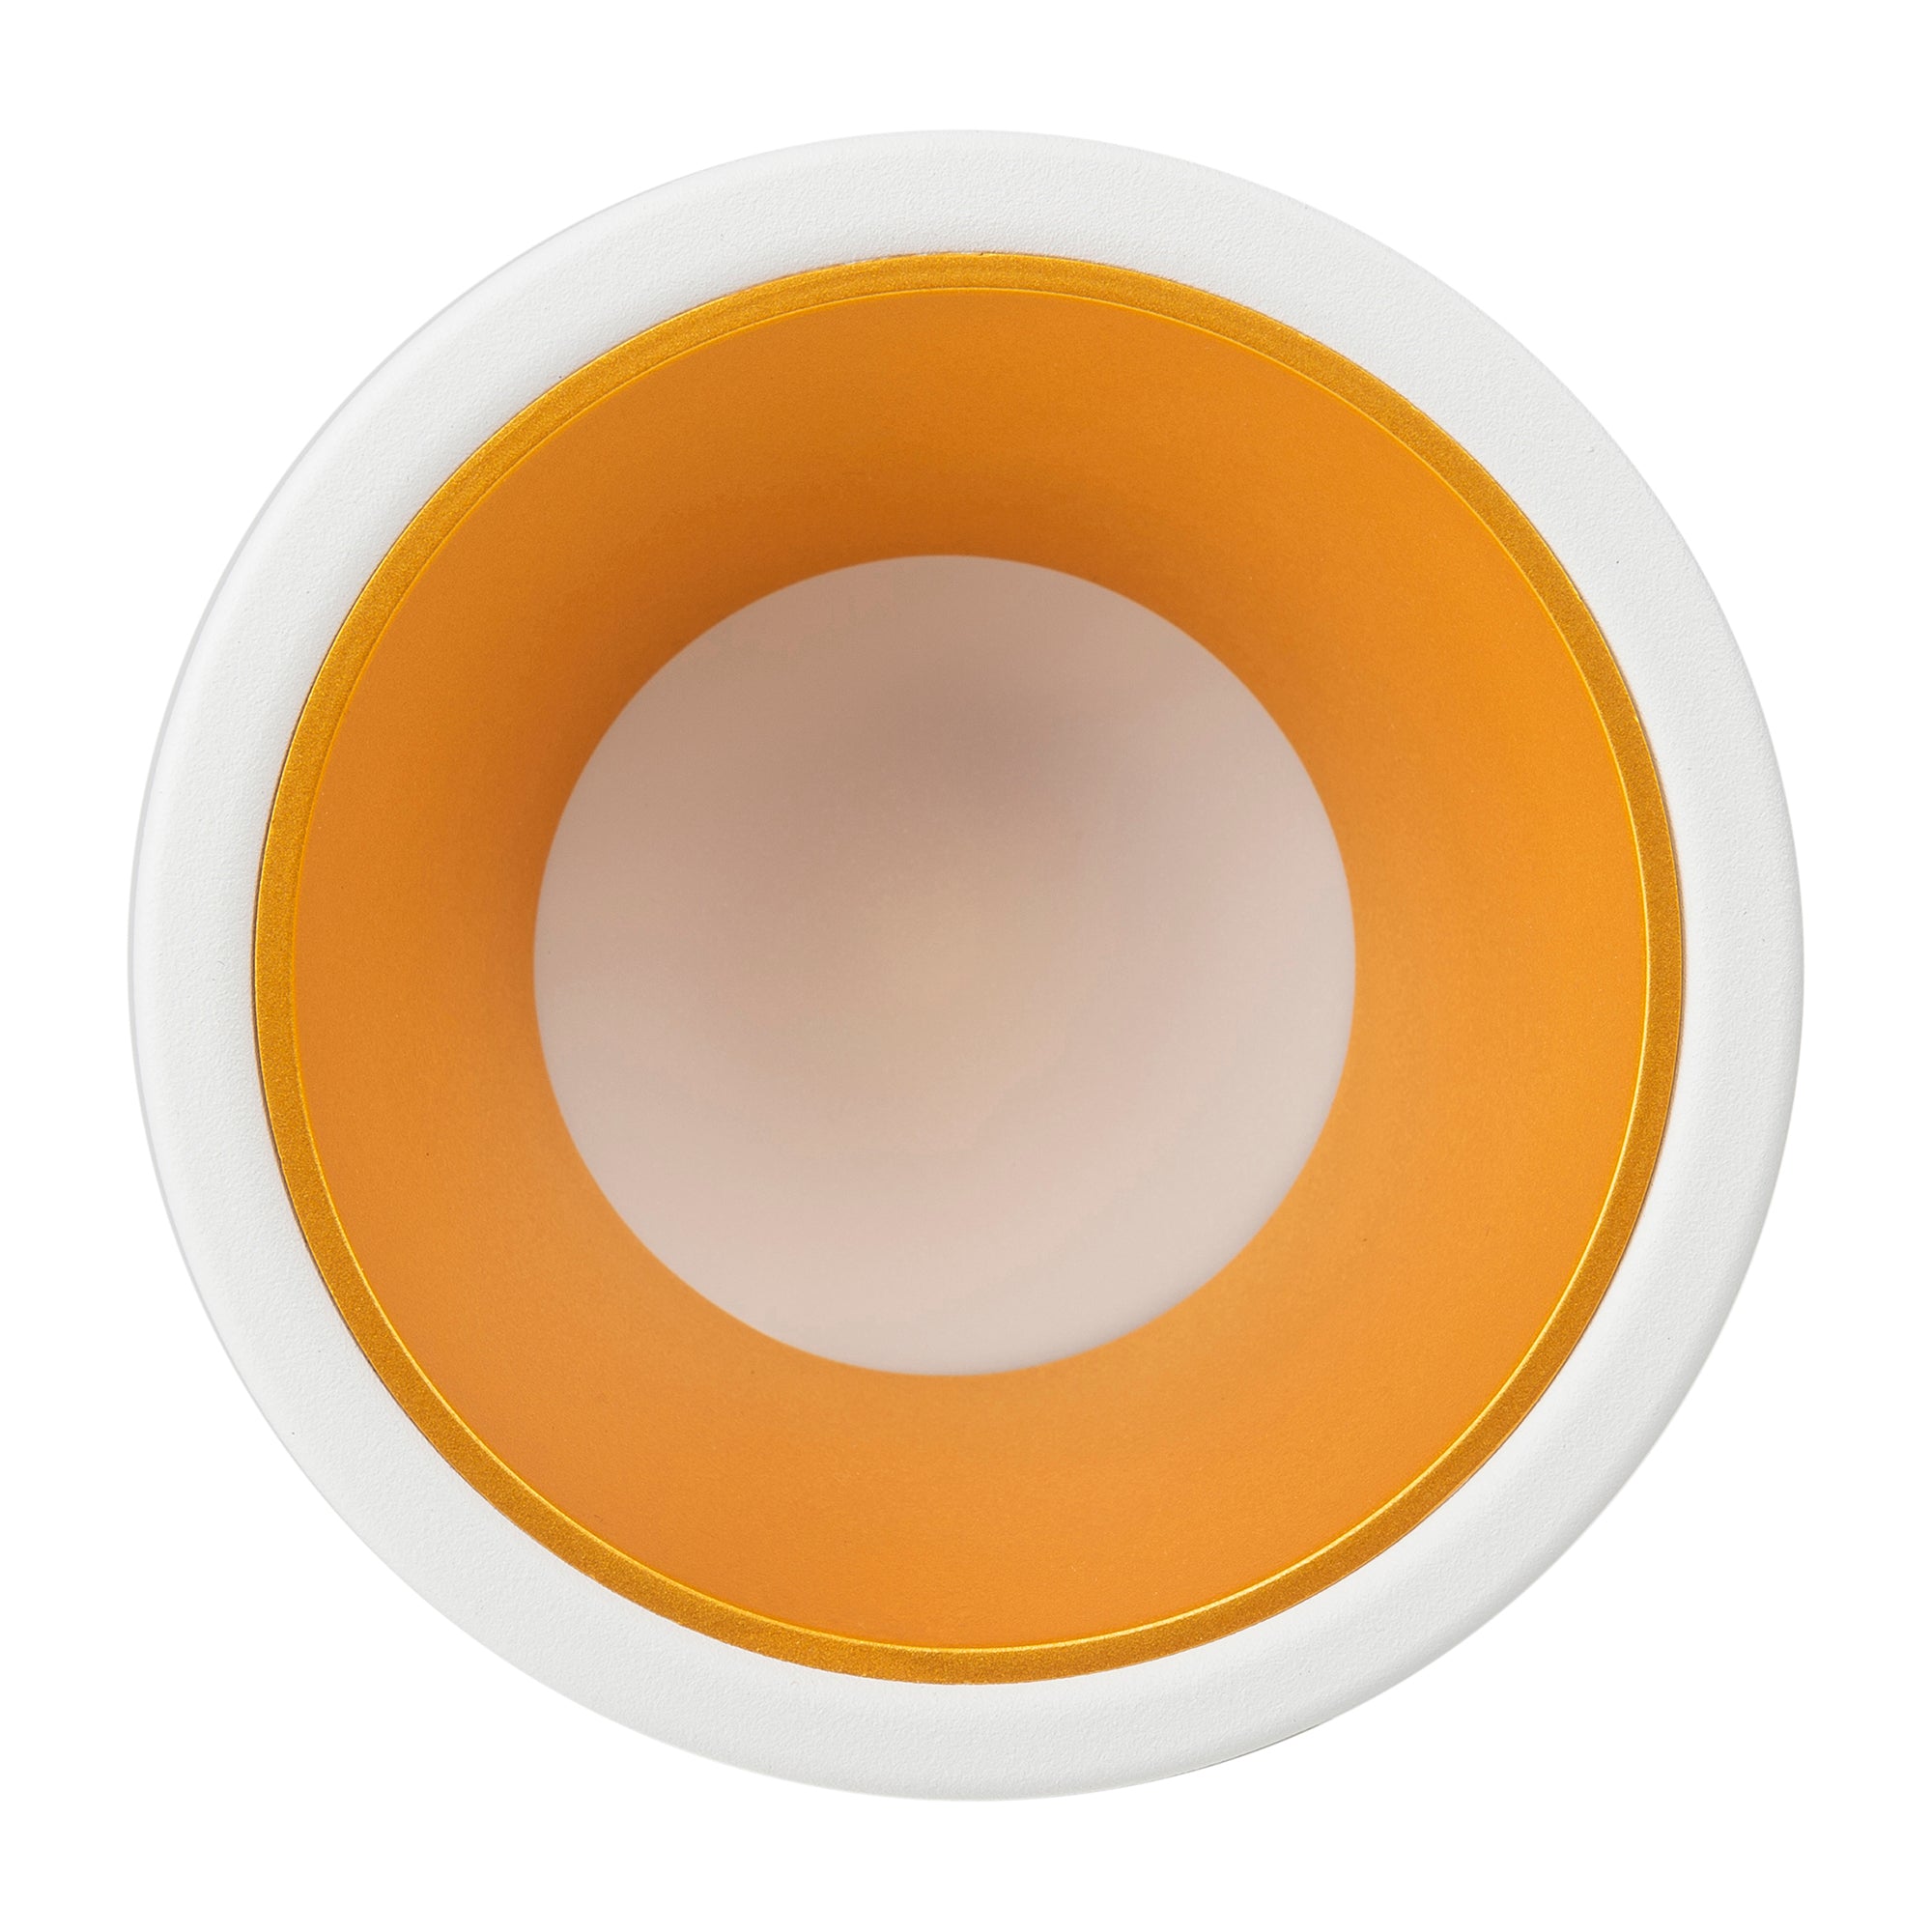 HV5529D2W-WG - Gleam White with Gold Insert Fixed Dim to Warm LED Downlight